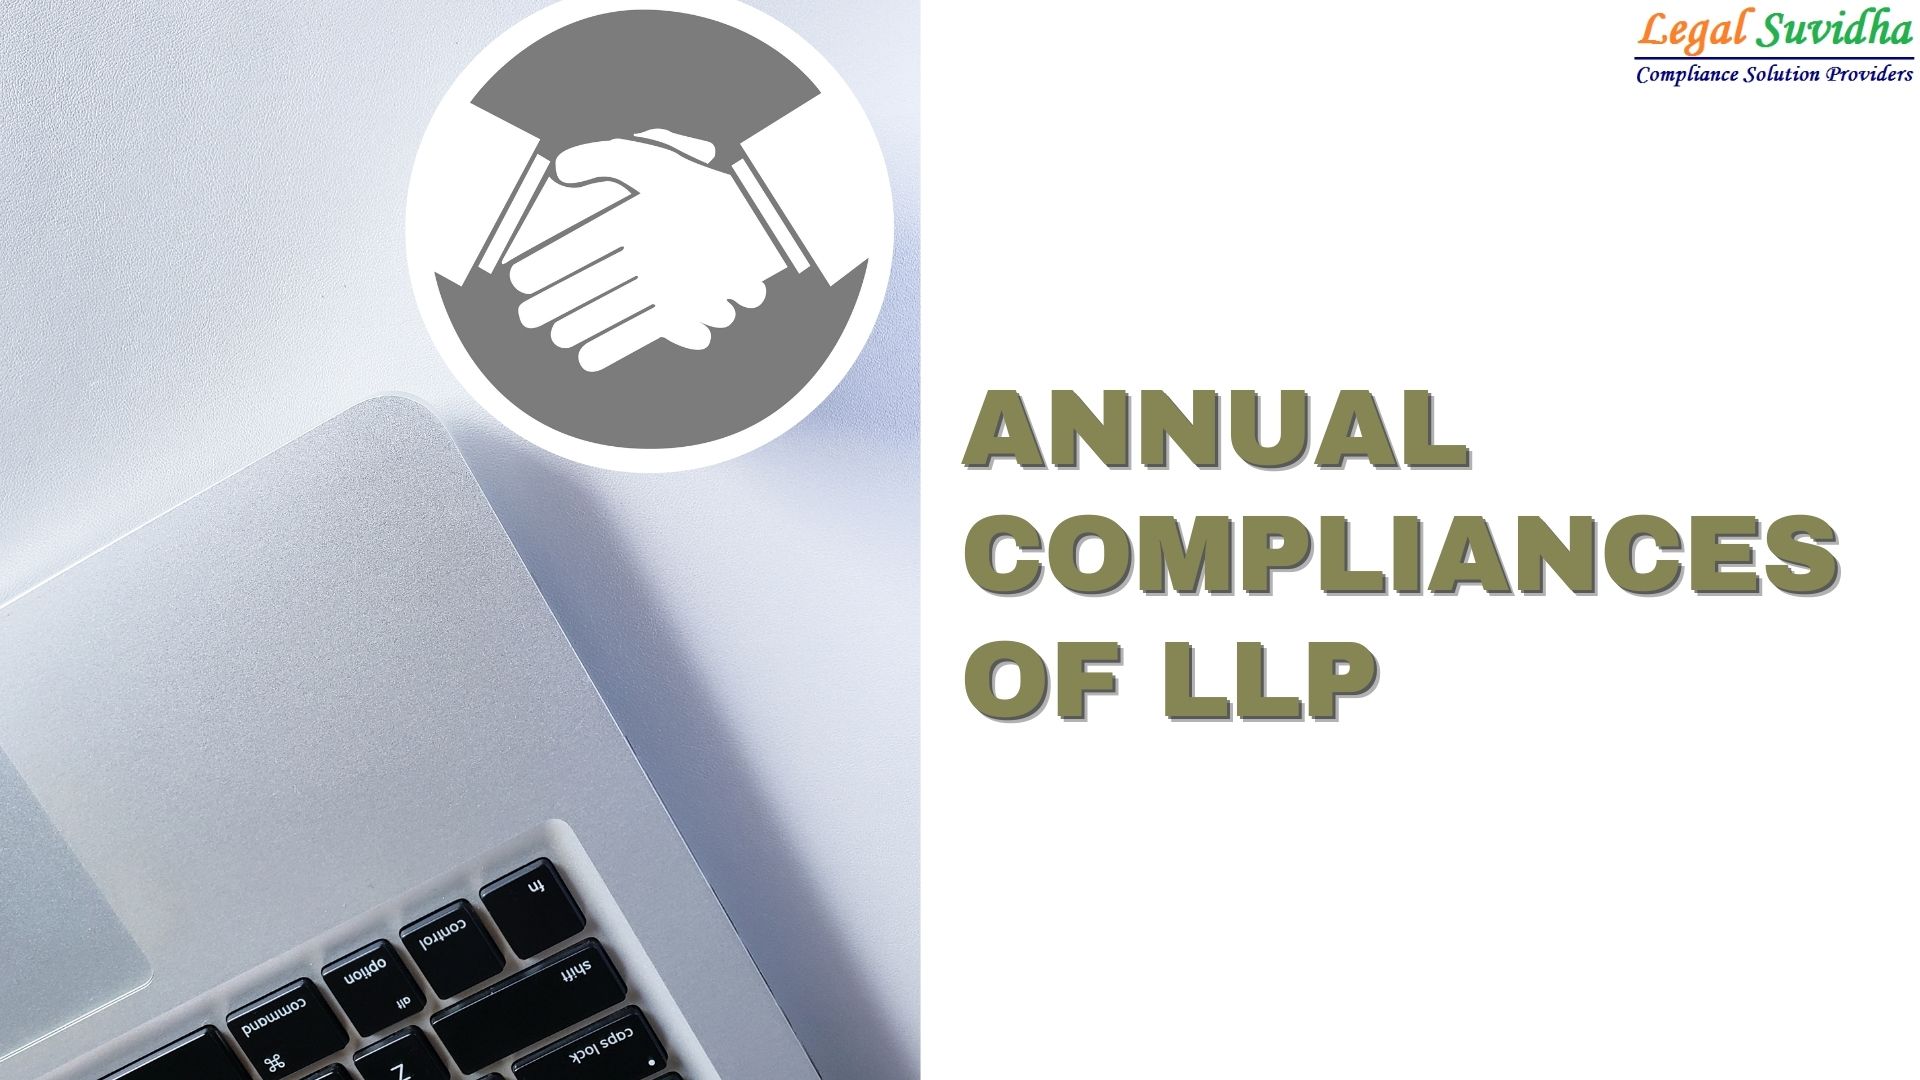 Annual Compliances of LLP